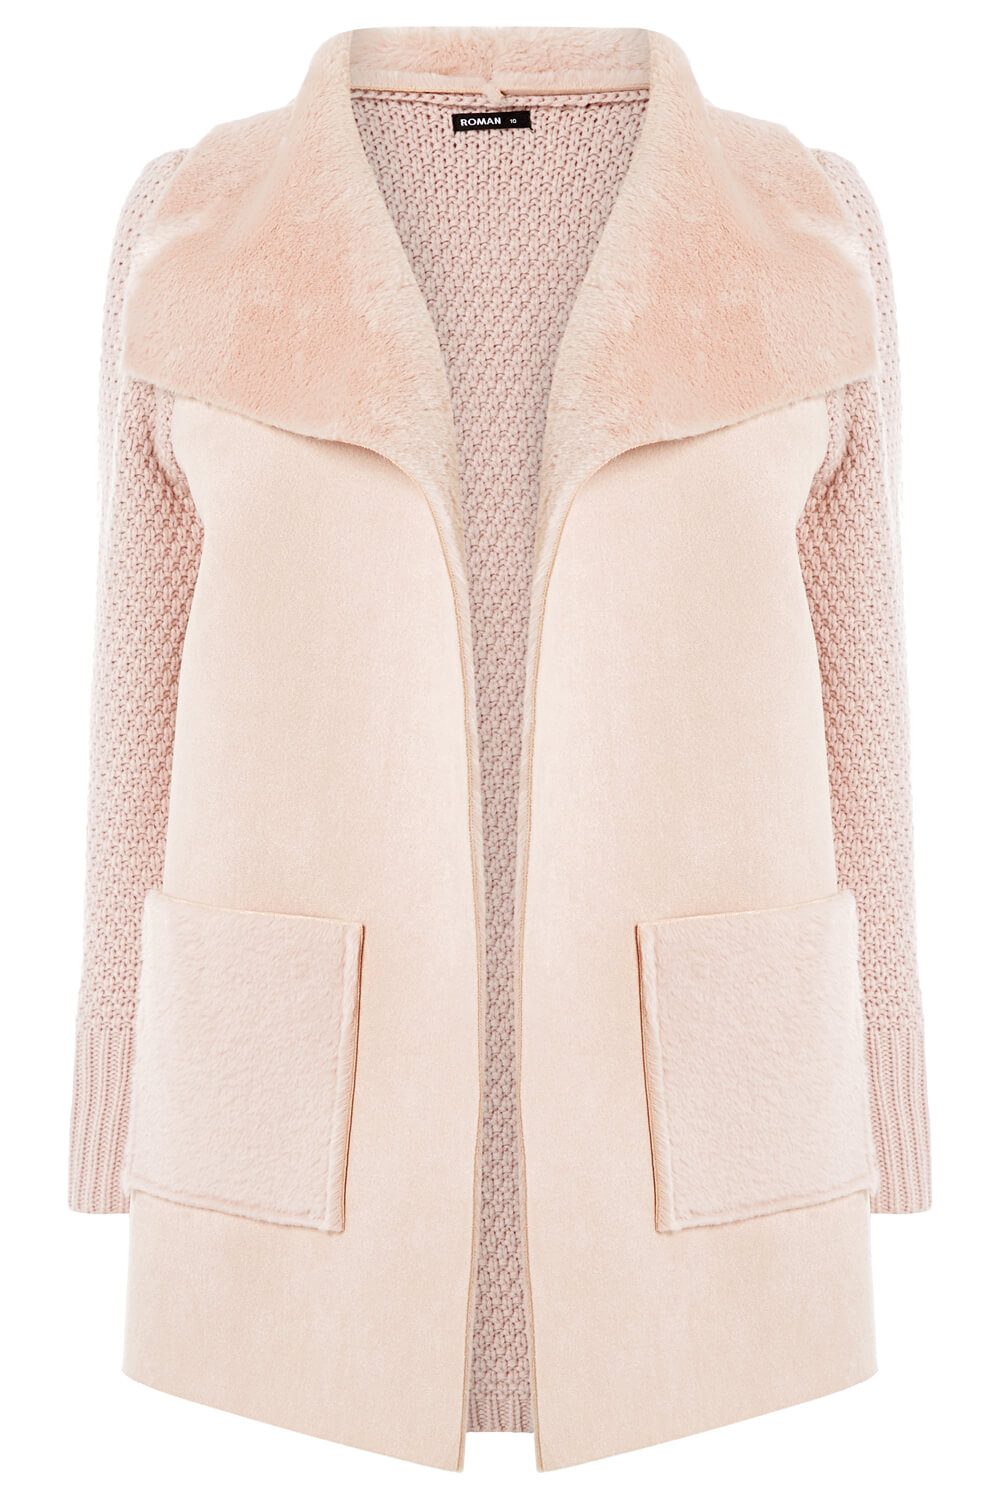 PINK Faux Shearling Patch Pocket Cardigan, Image 5 of 5